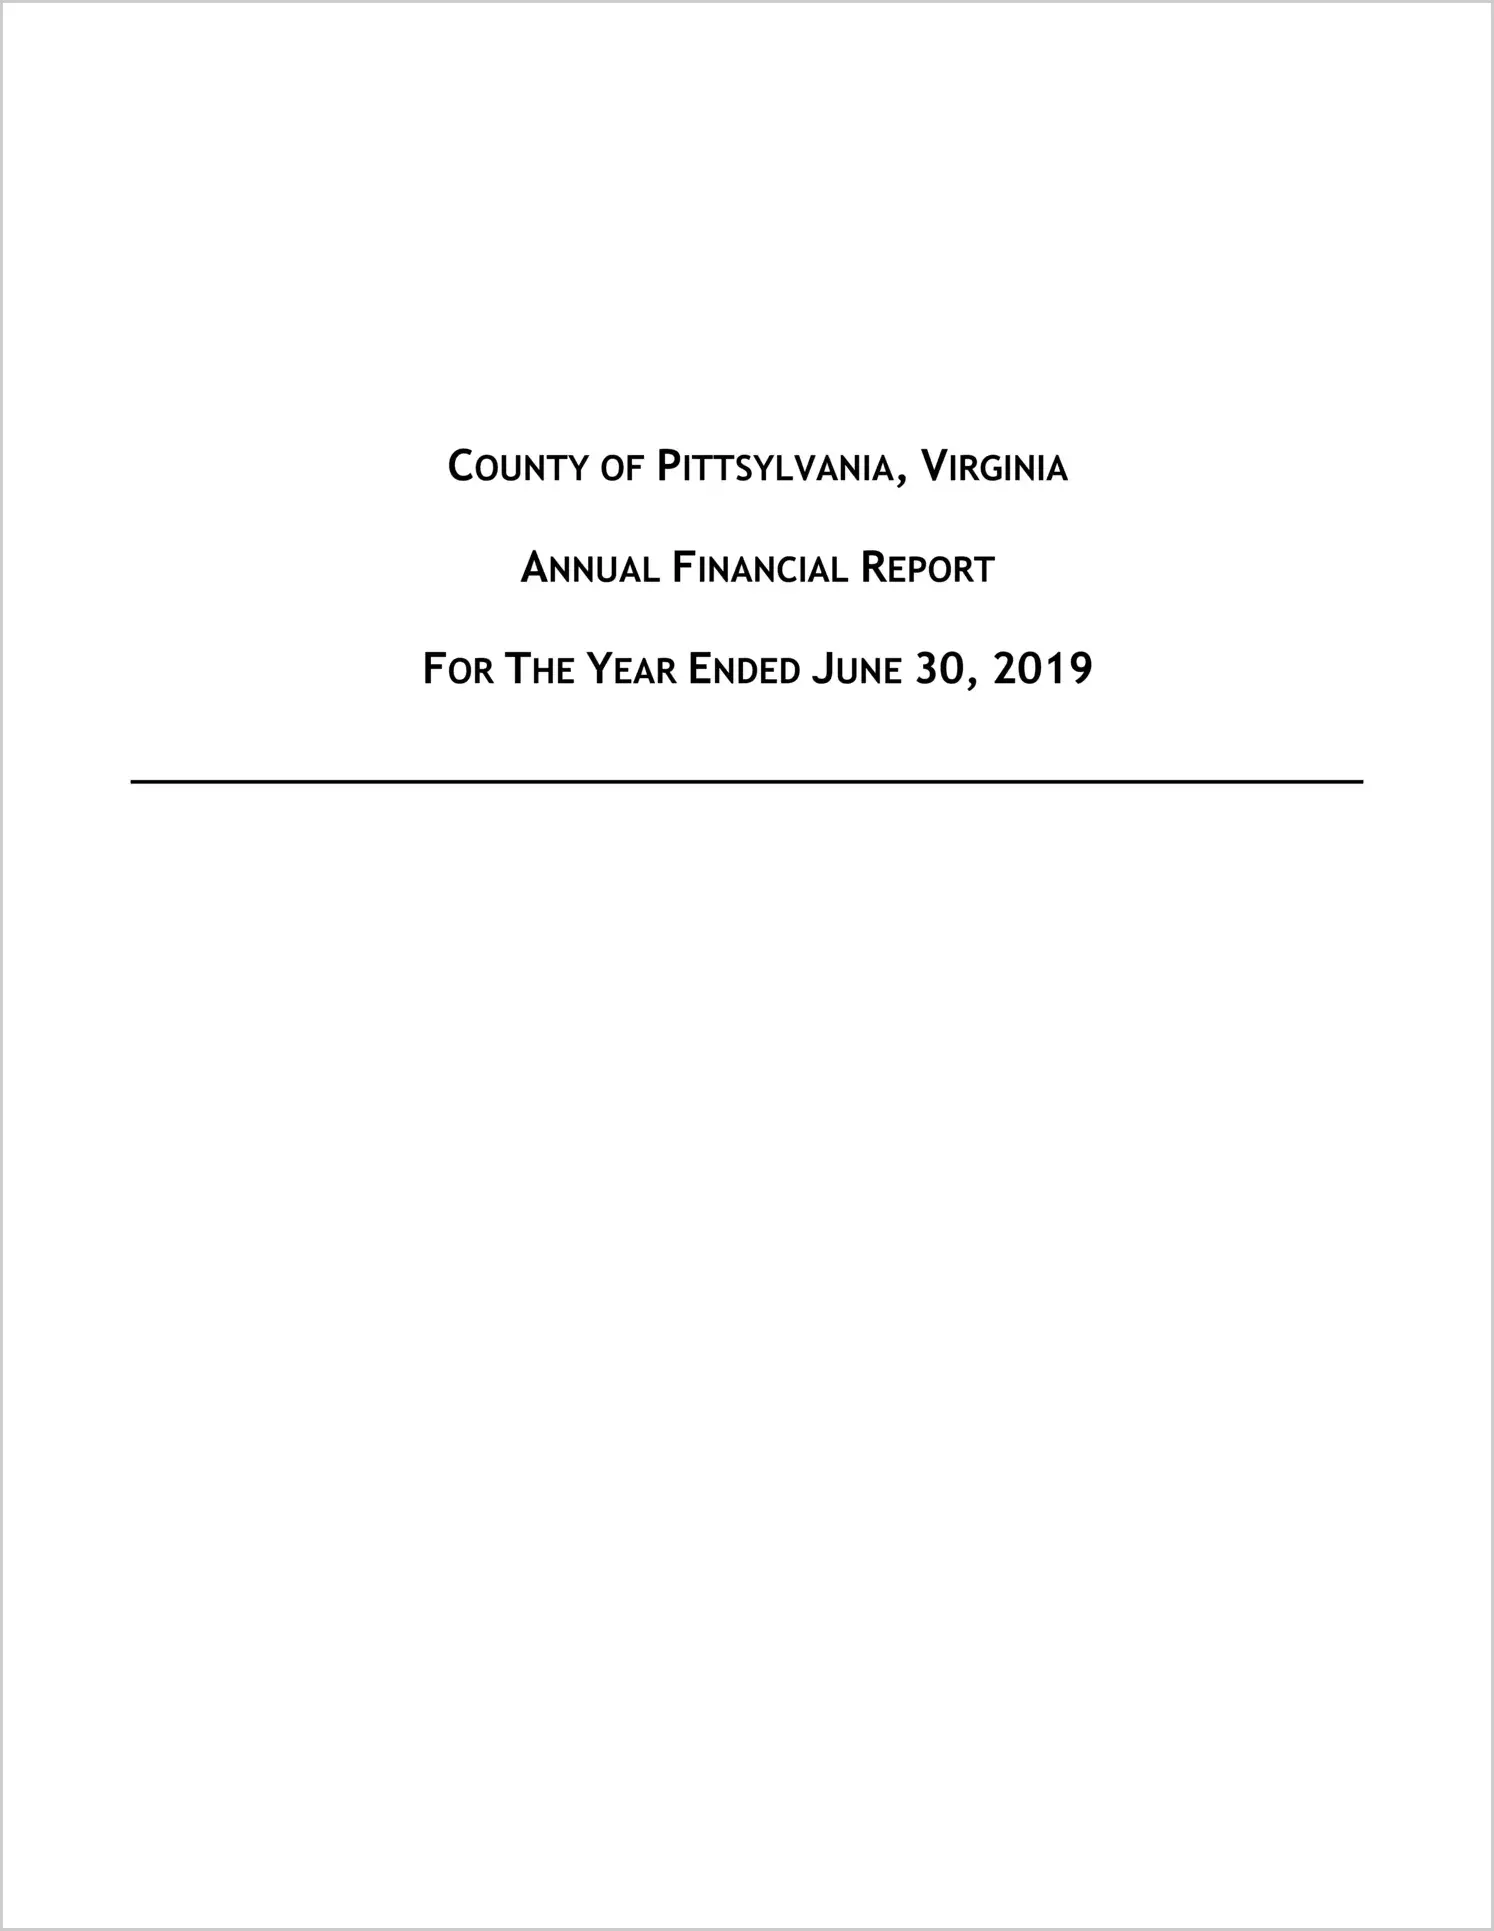 2019 Annual Financial Report for County of Pittsylvania